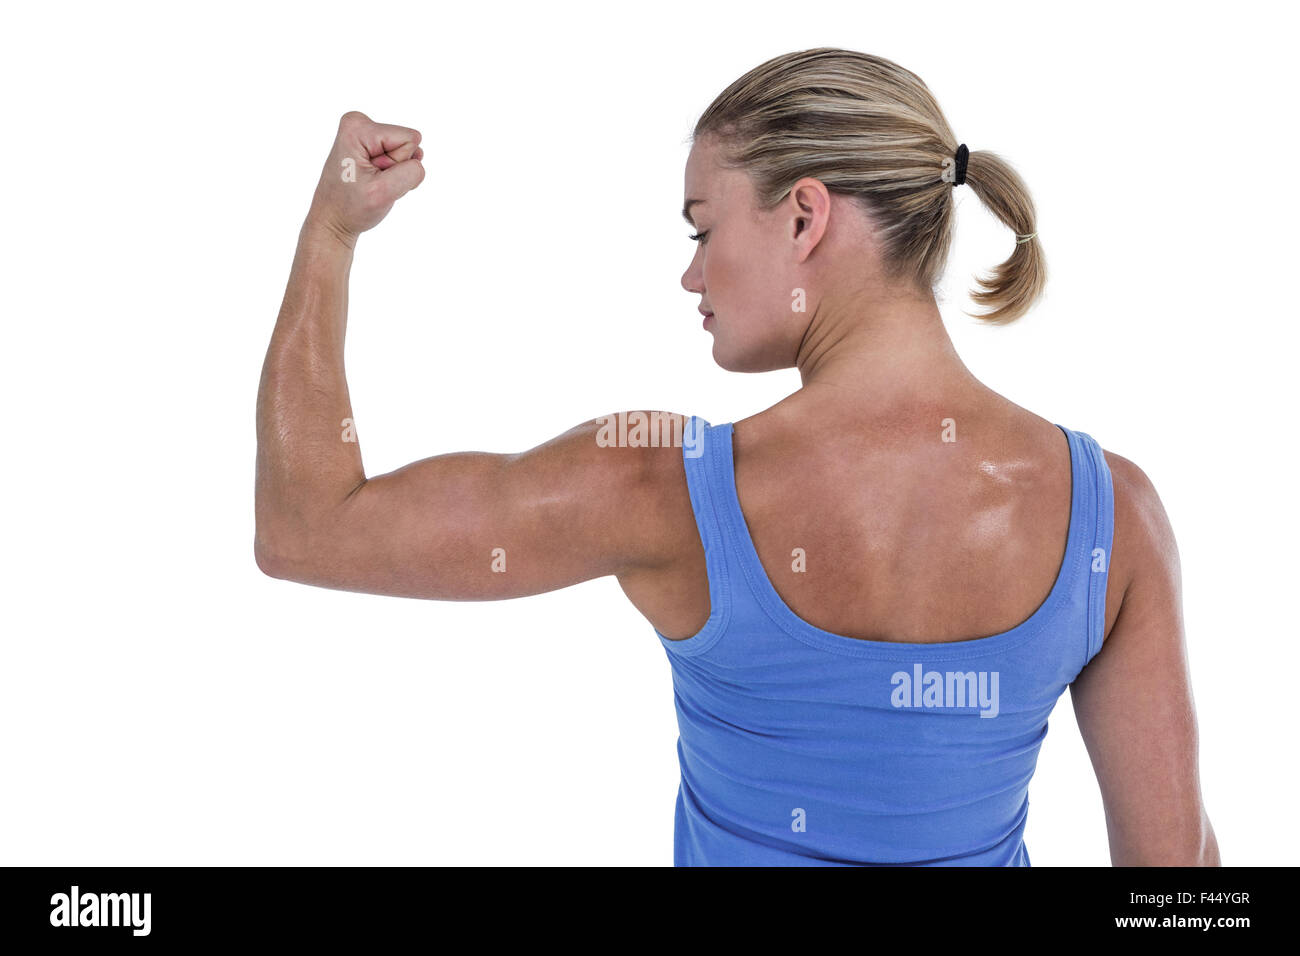 Rear view of muscular woman flexing muscles Stock Photo